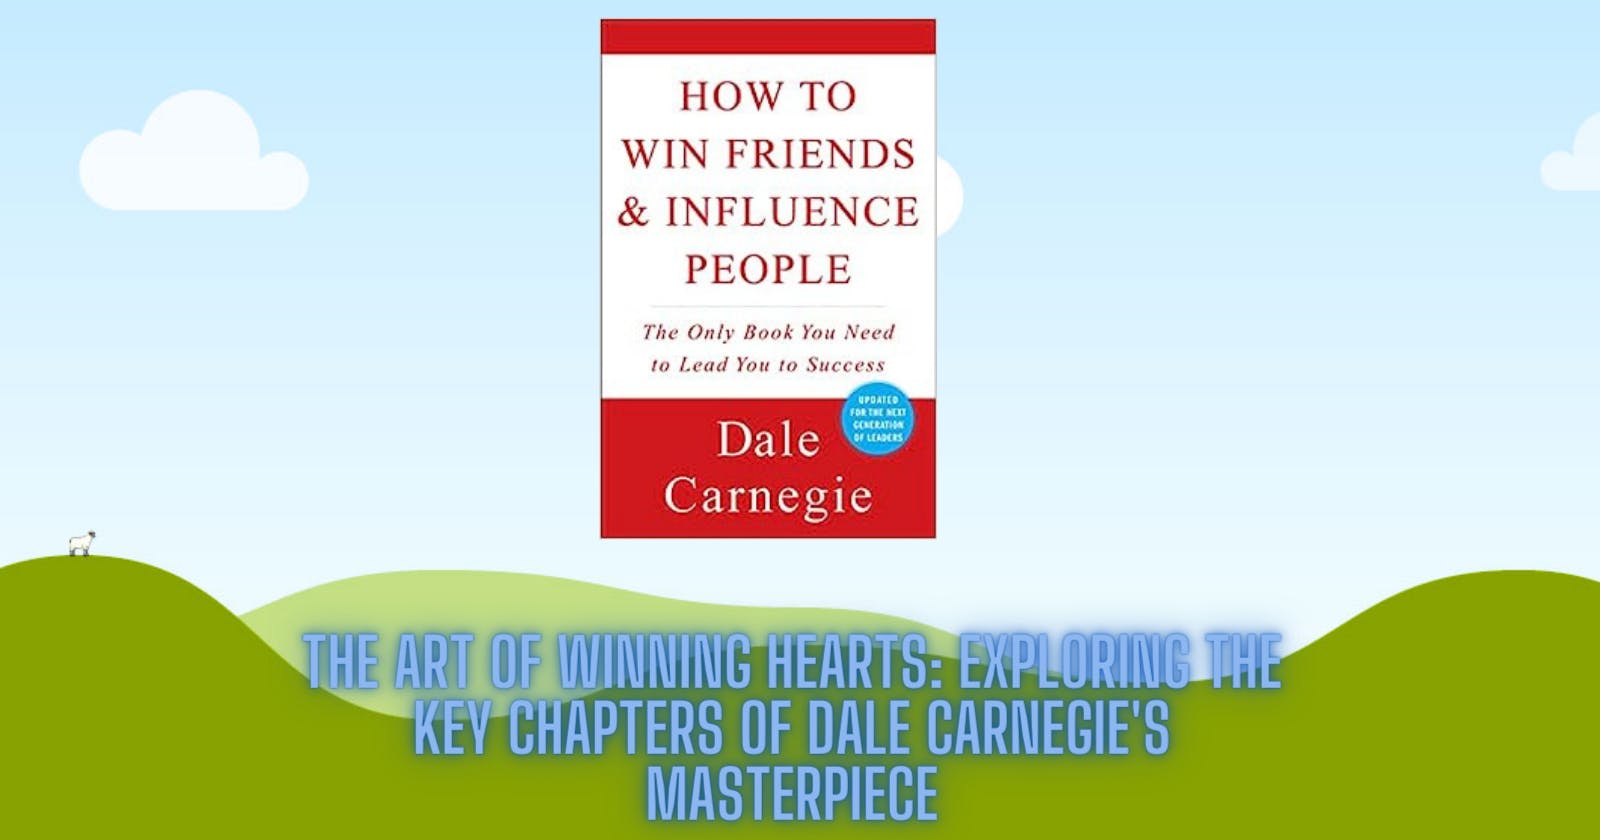 The Art of Winning Hearts: Exploring the Key Chapters of Dale Carnegie's Masterpiece